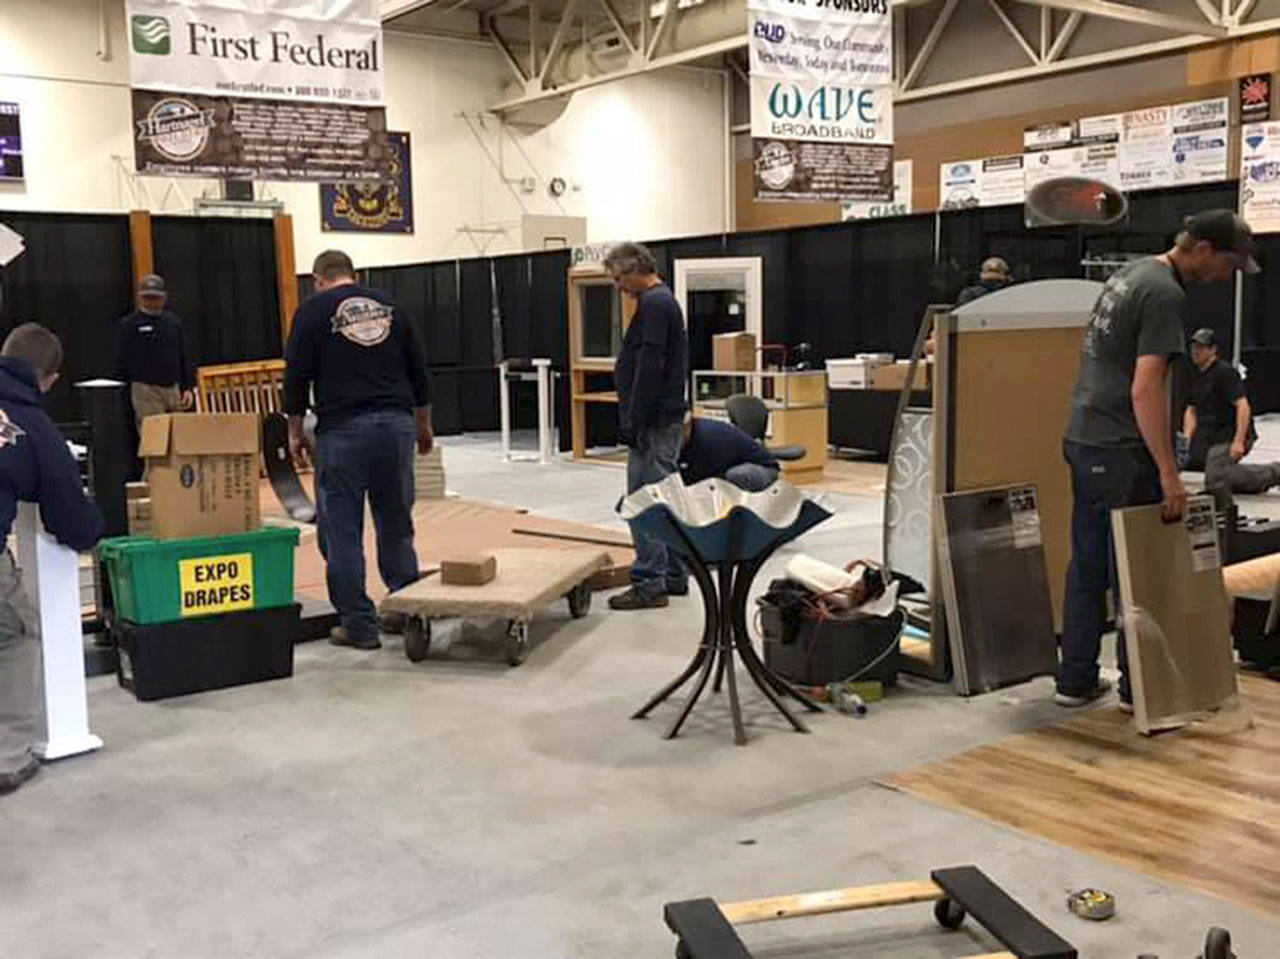 On Friday, vendors were setting up for the weekend North Peninsula Building Association Expo at Sequim High School. (North Olympic Building Association)